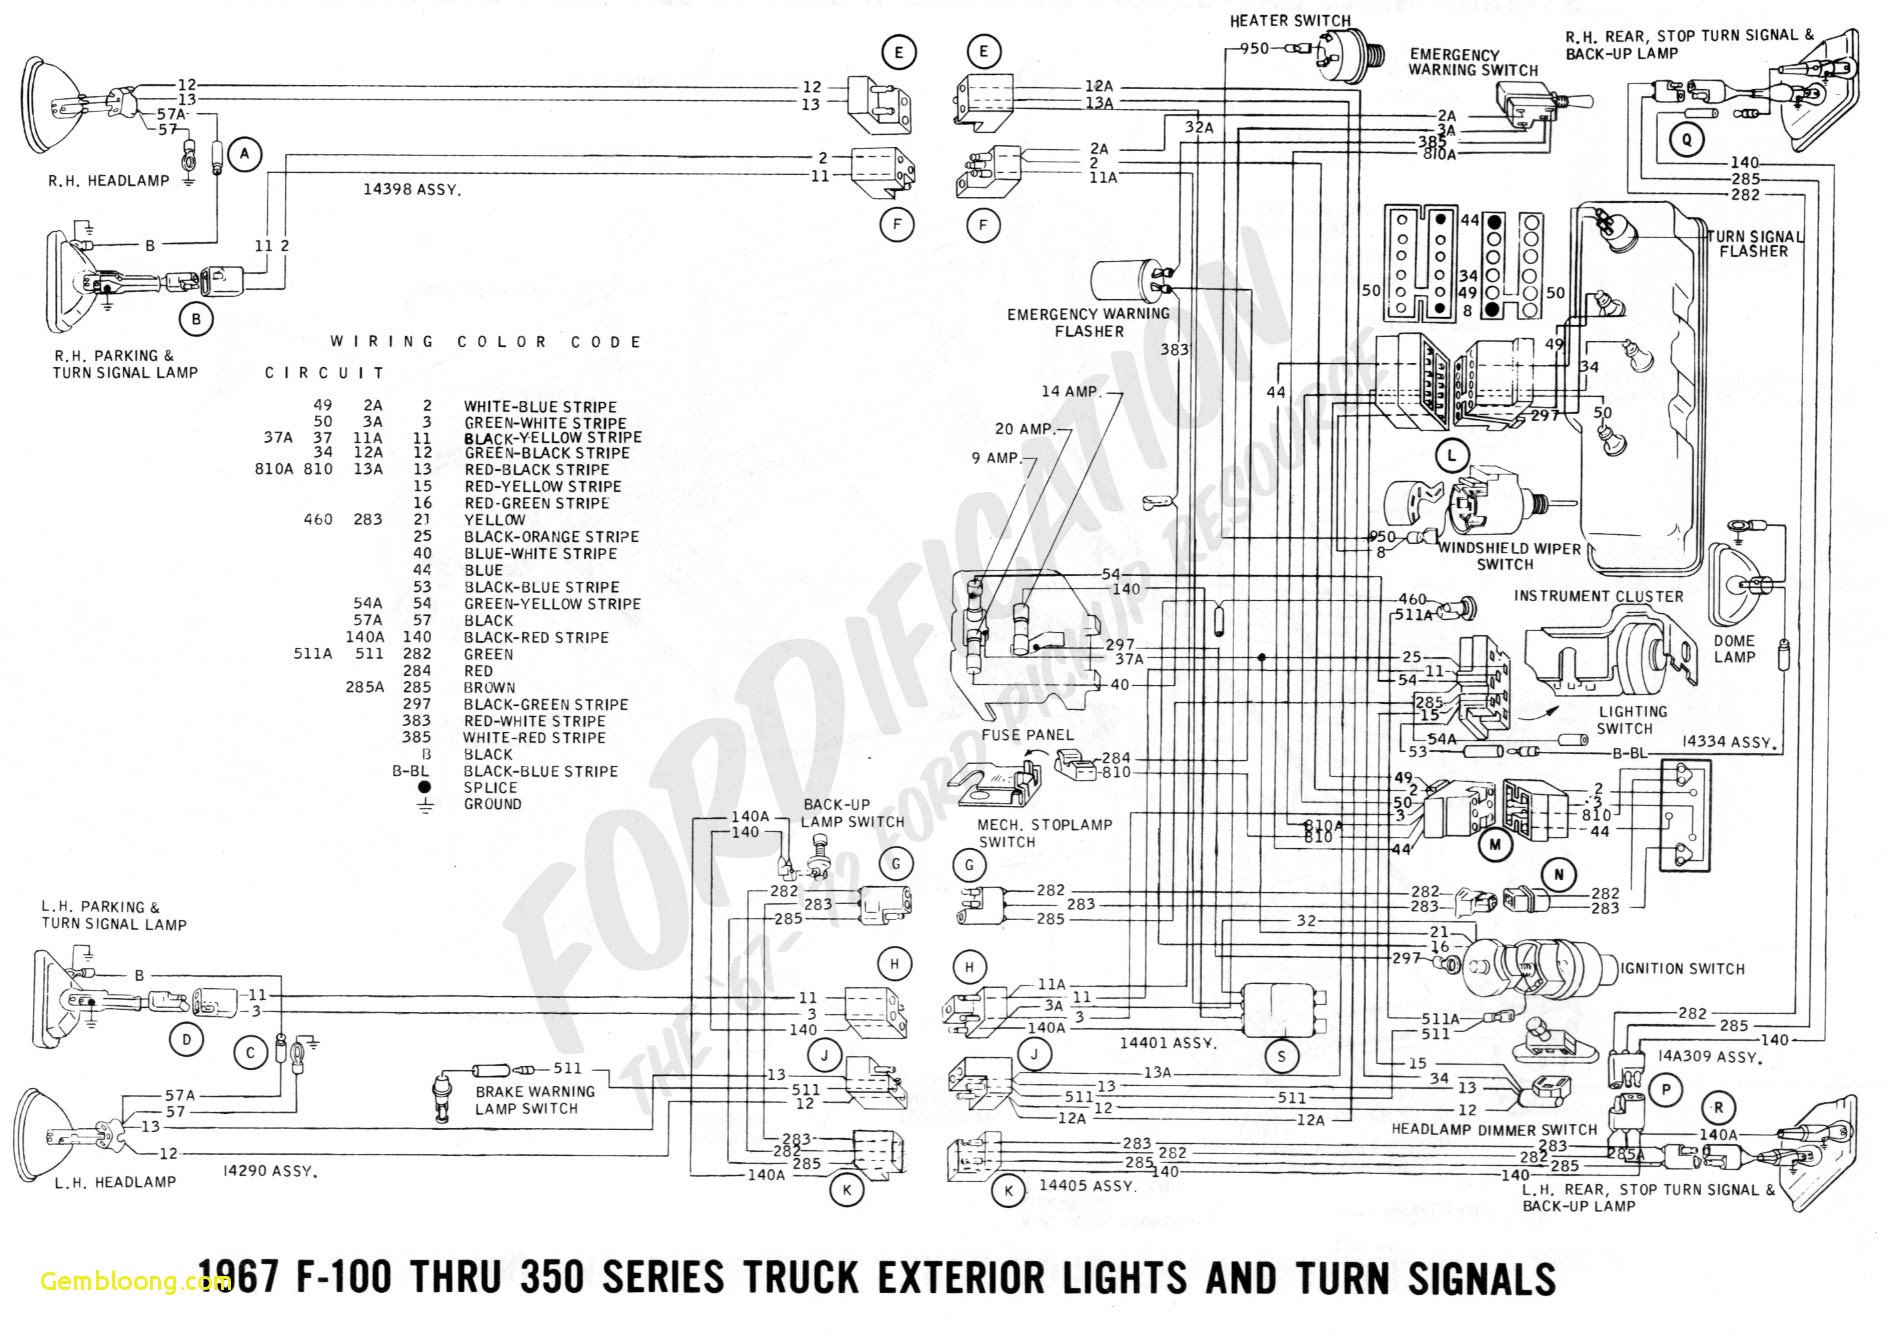 Rotary Engine Diagram Download ford Trucks Wiring Diagrams ford F150 Wiring Diagrams Best Of Rotary Engine Diagram